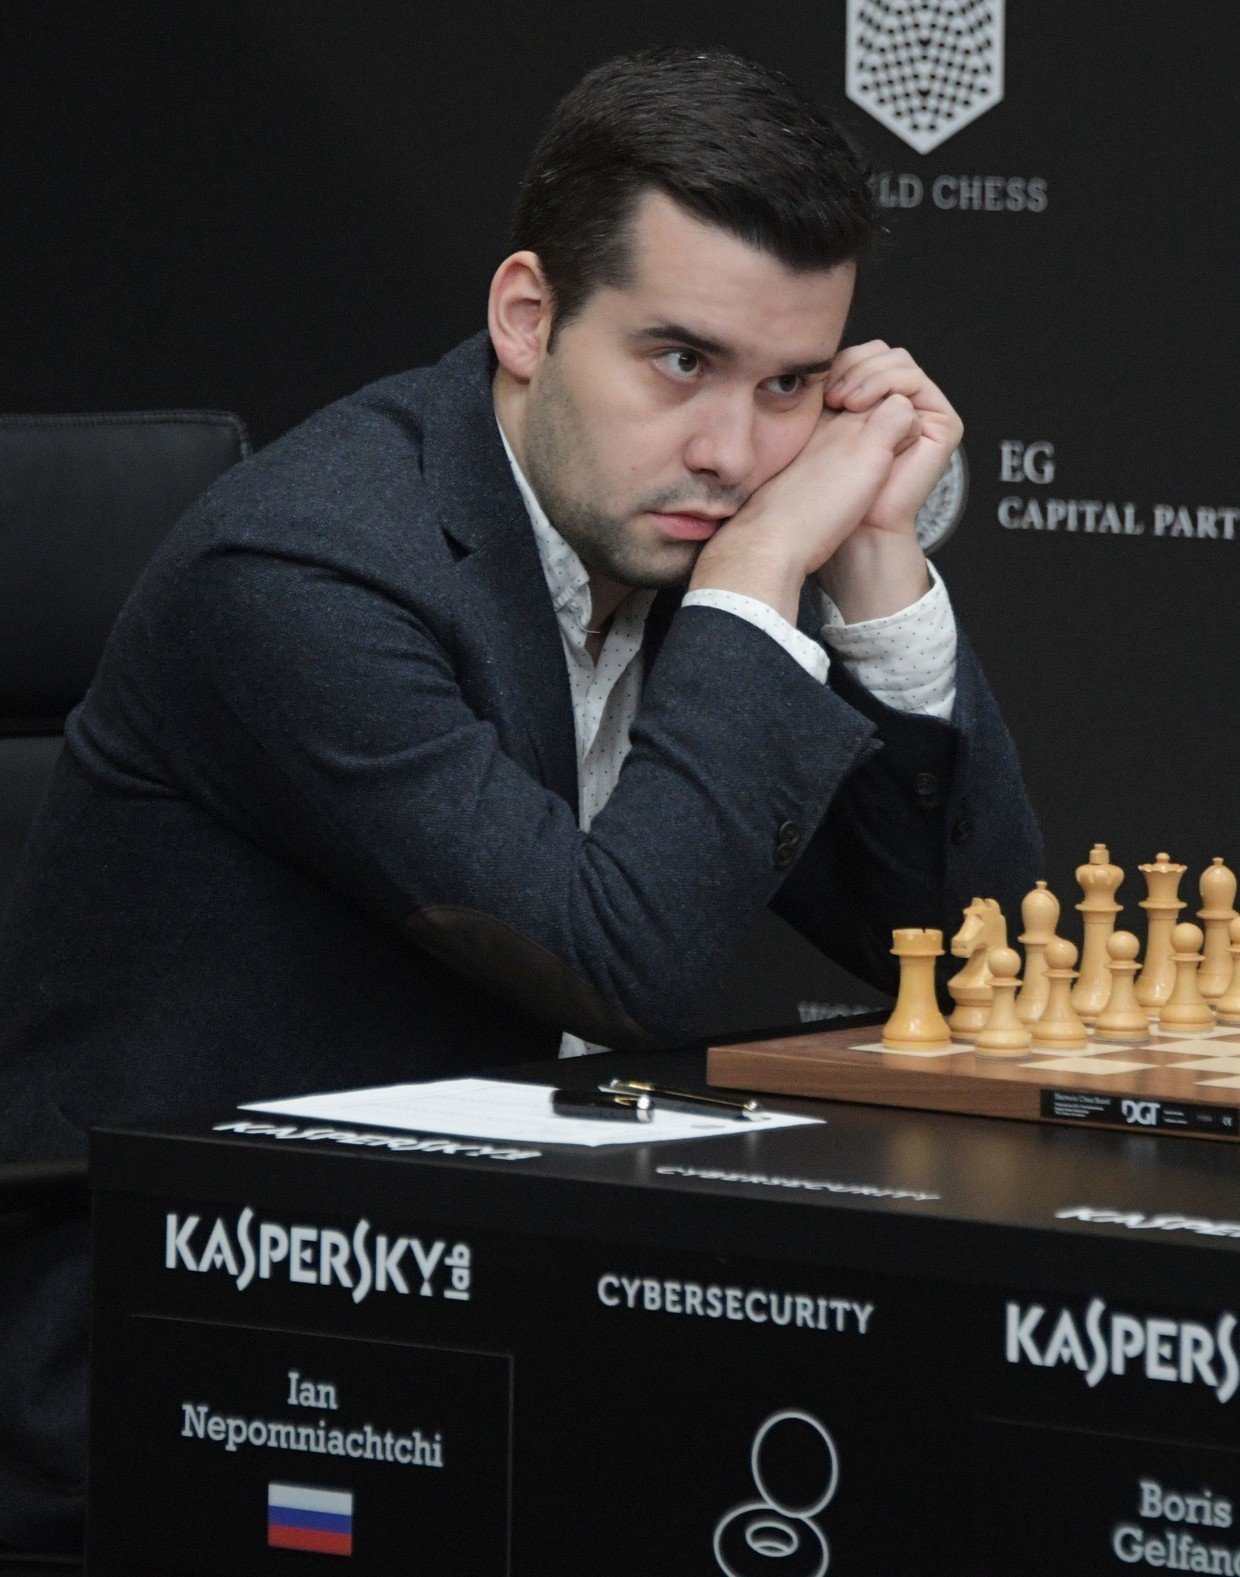 The chess games of Ian Nepomniachtchi